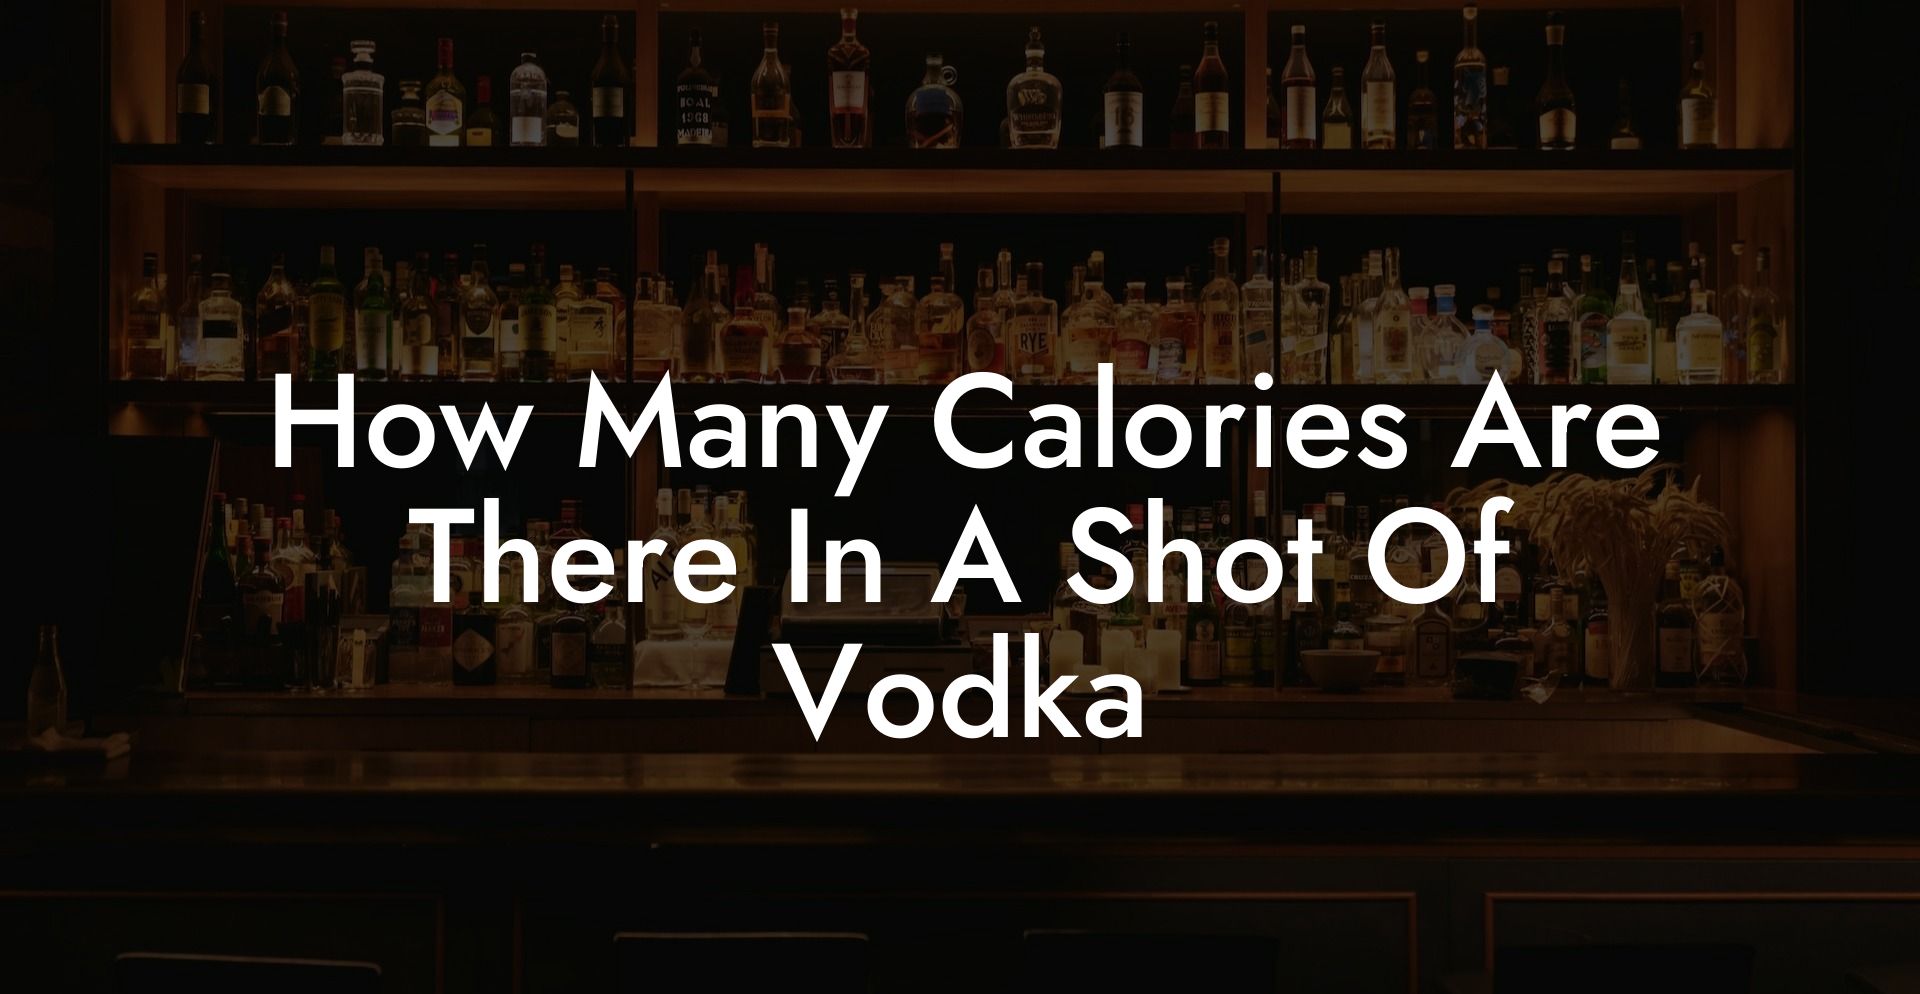 How Many Calories Are There In A Shot Of Vodka